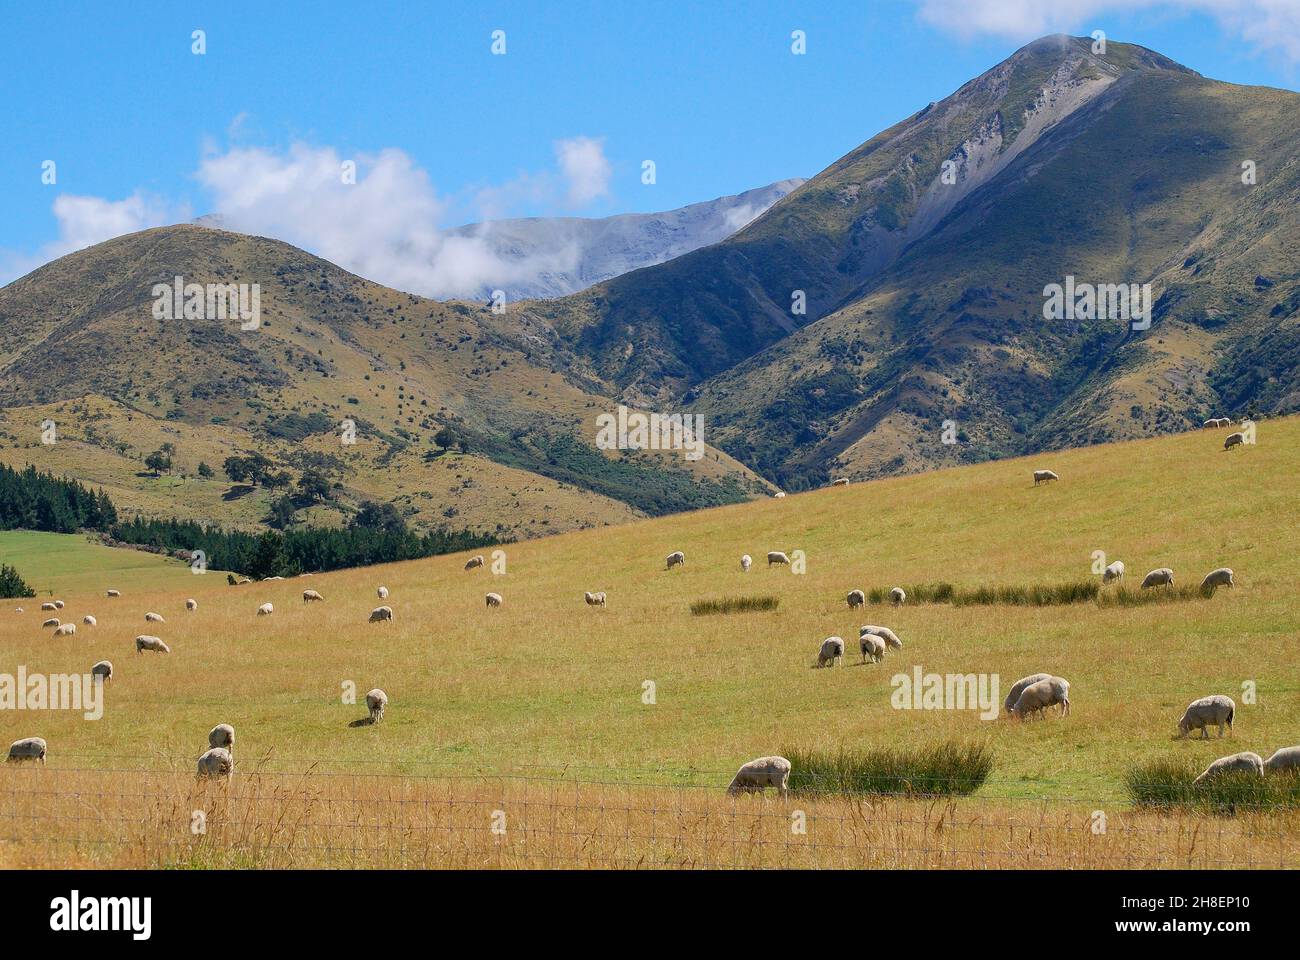 Sheep grazing in hill country, Selwyn District, Canterbury, South Island, New Zealand Stock Photo